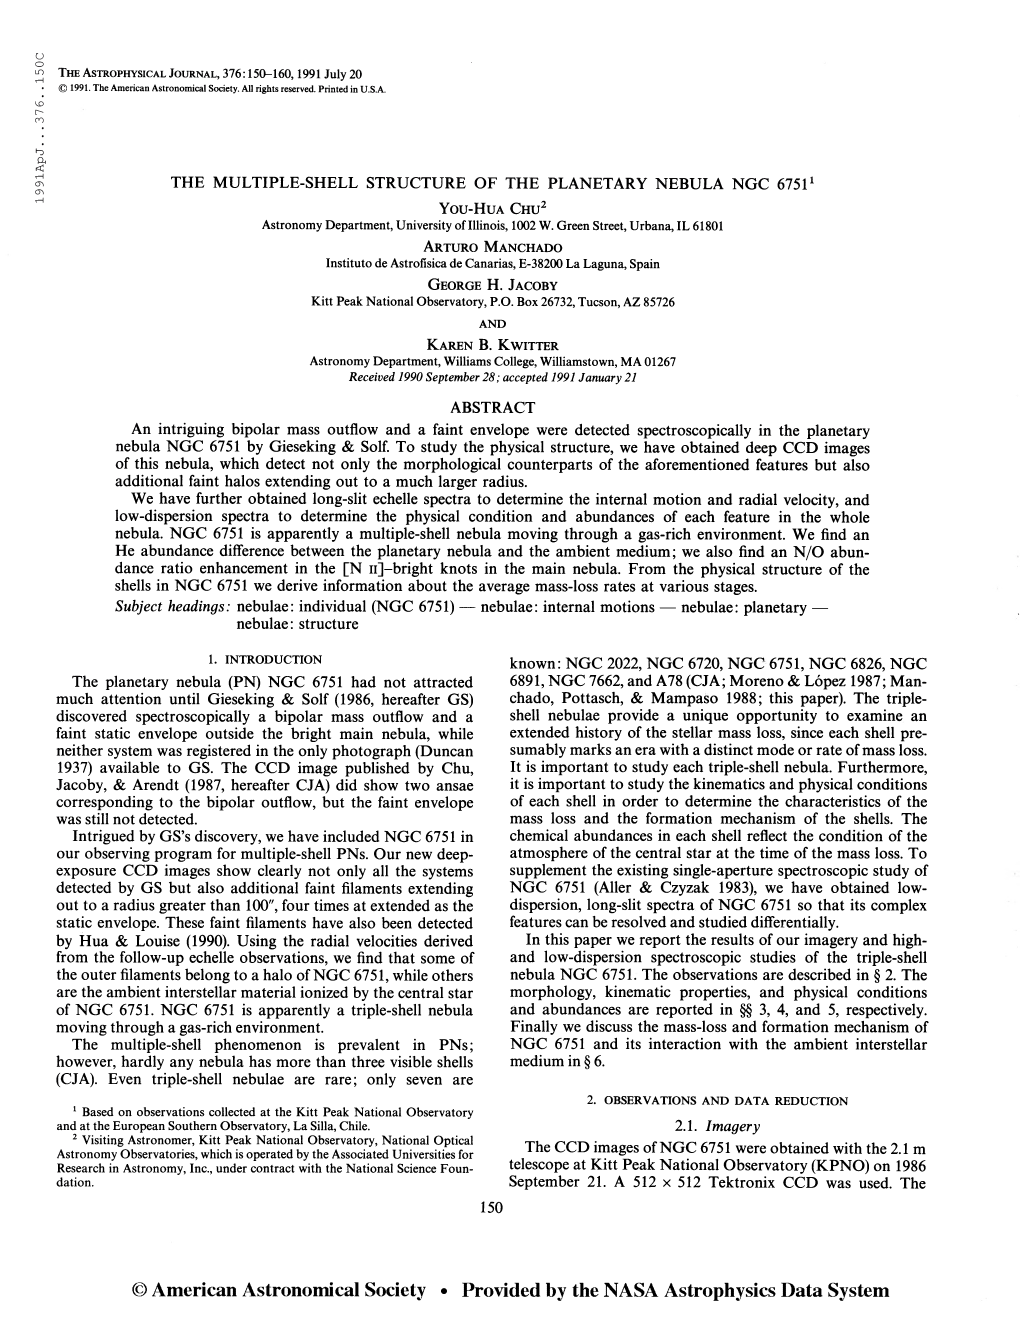 1991Apj. . .376. .150C the Astrophysical Journal, 376:150-160,1991 July 20 © 1991. the American Astronomical Society. All Right